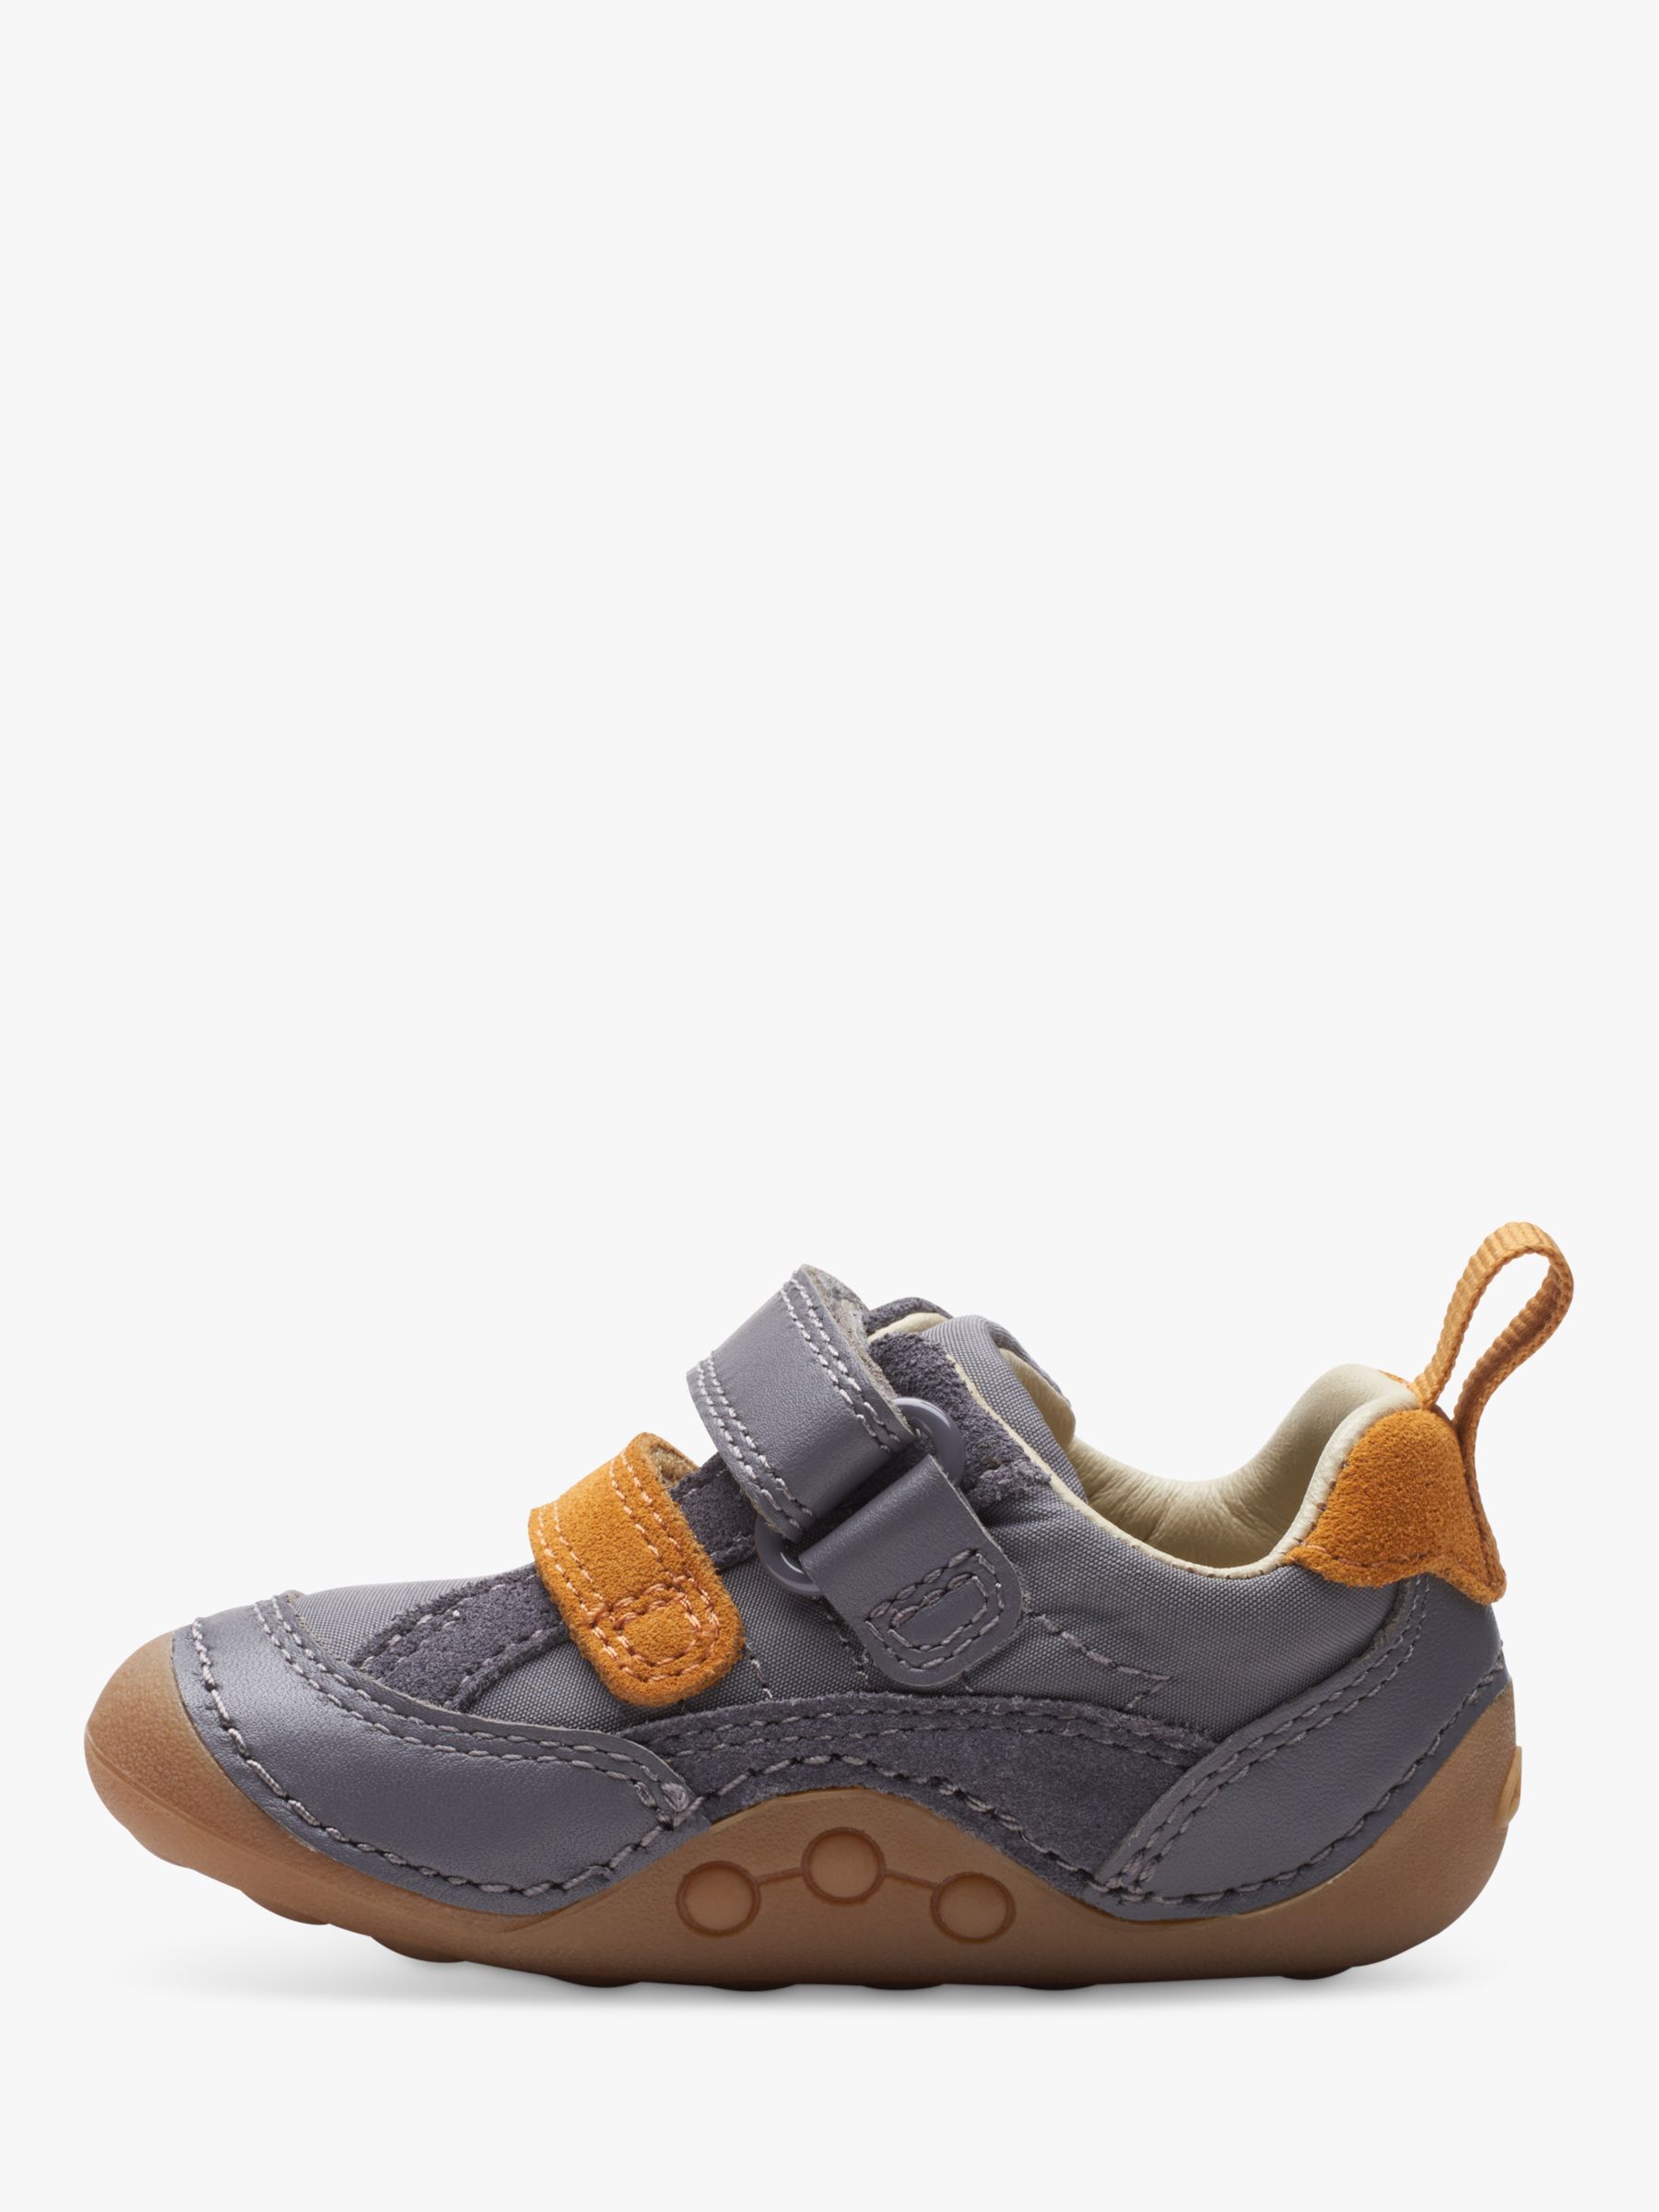 Clarks Baby Fawn Pre-Walker at John Lewis & Partners